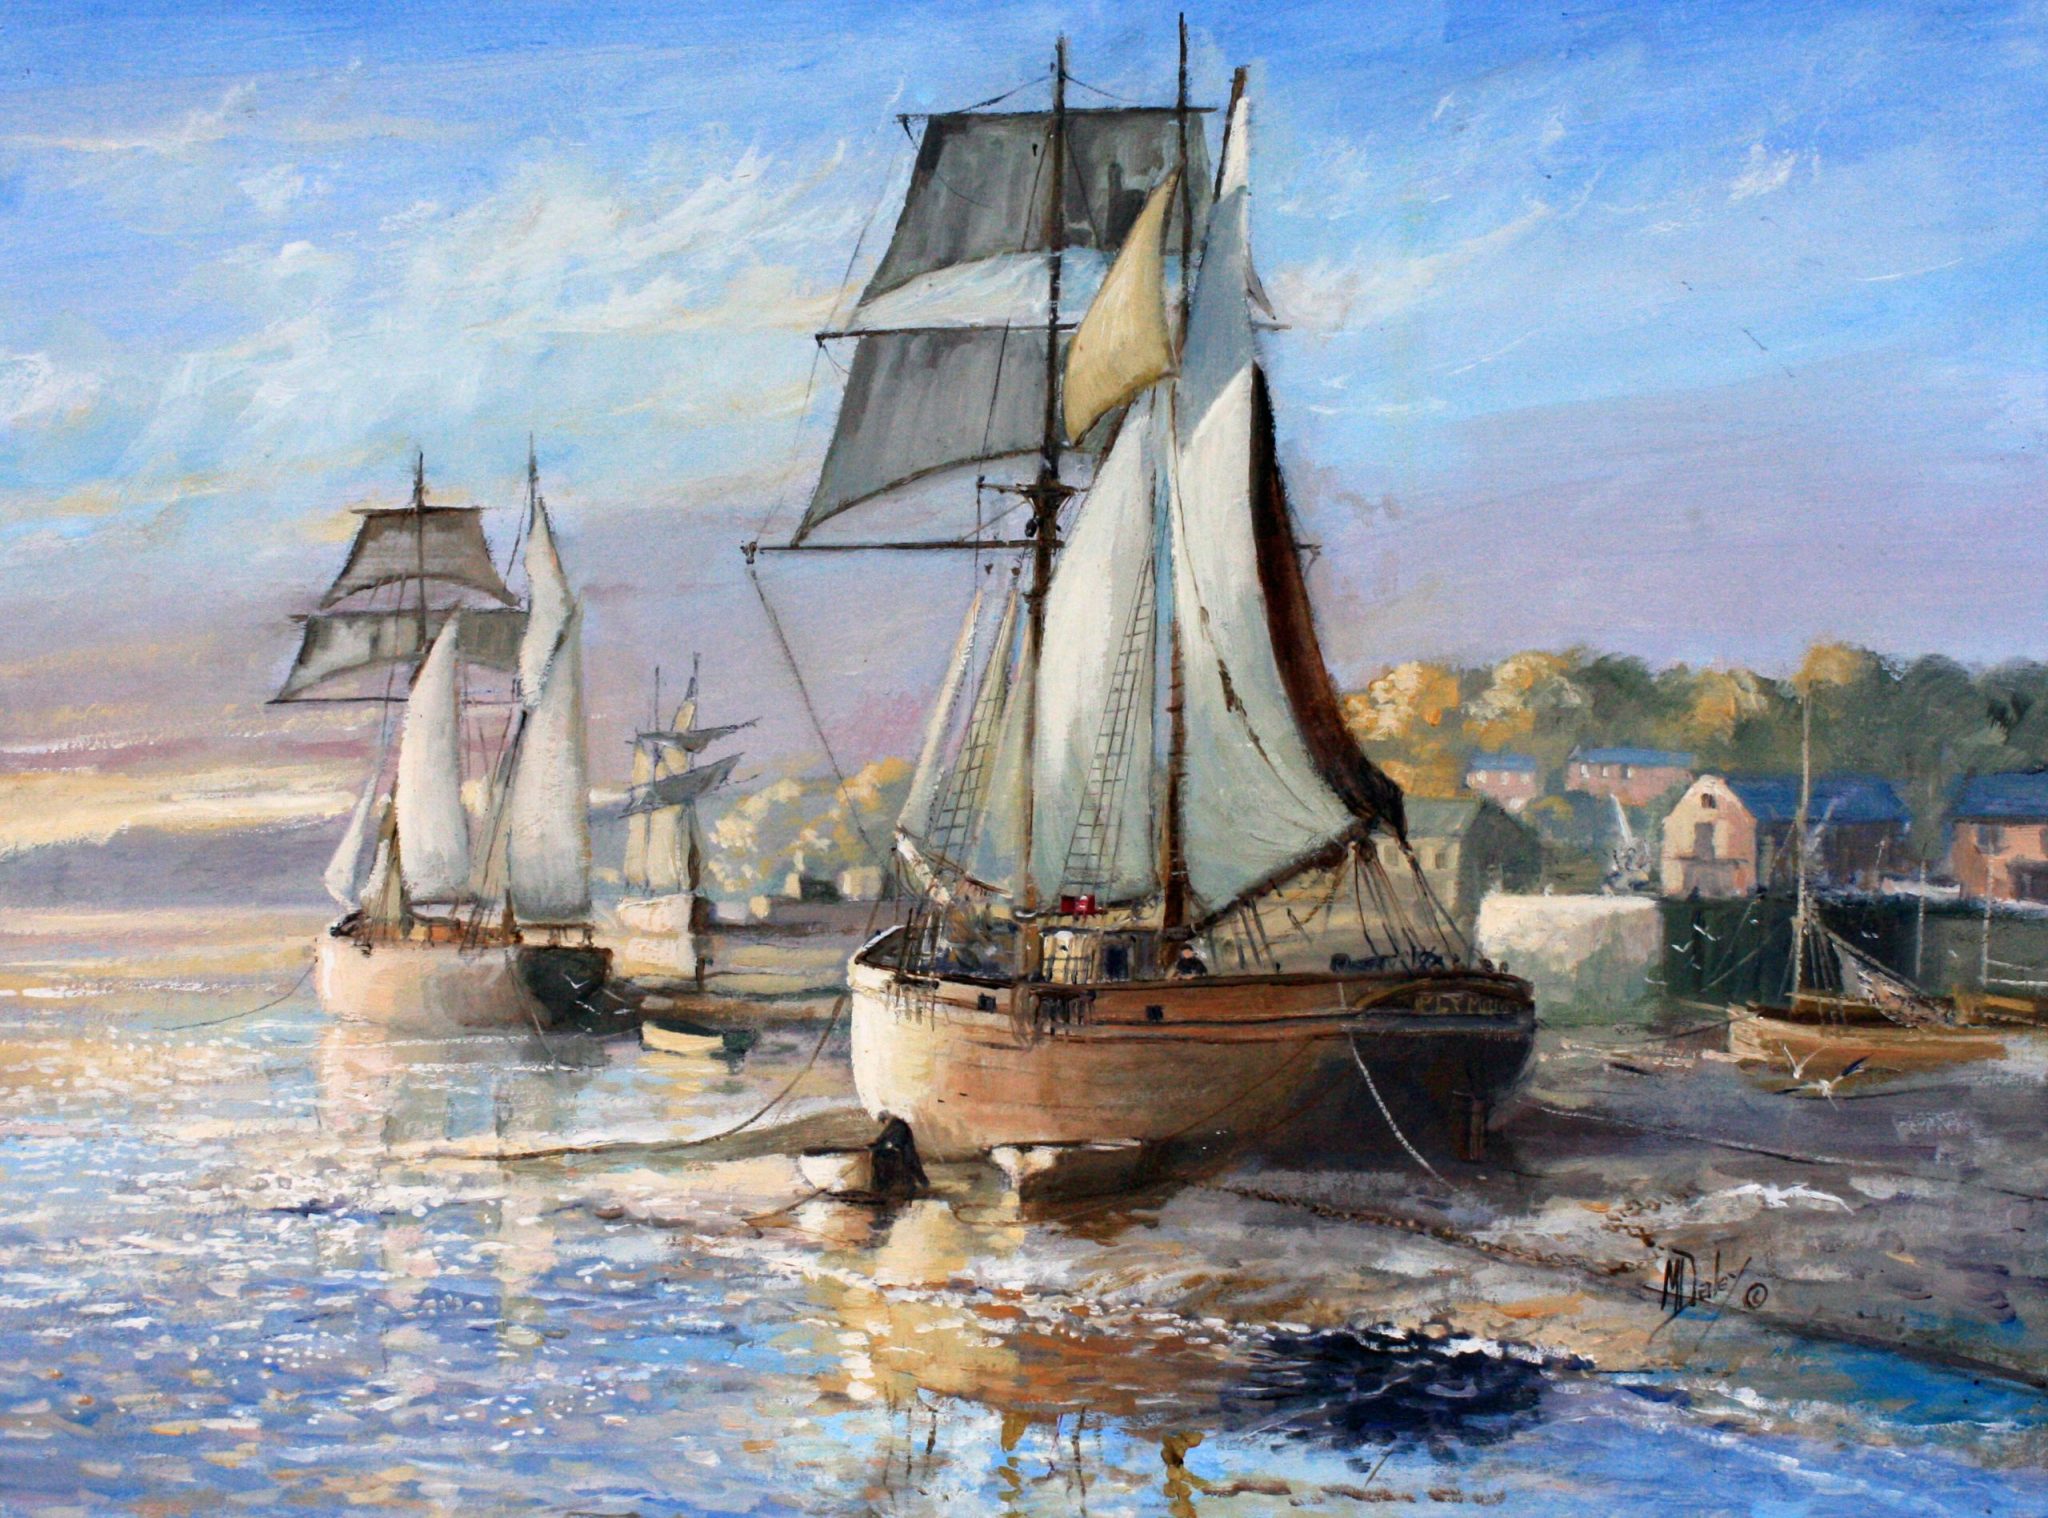 Drying Sails by Michael Dayley